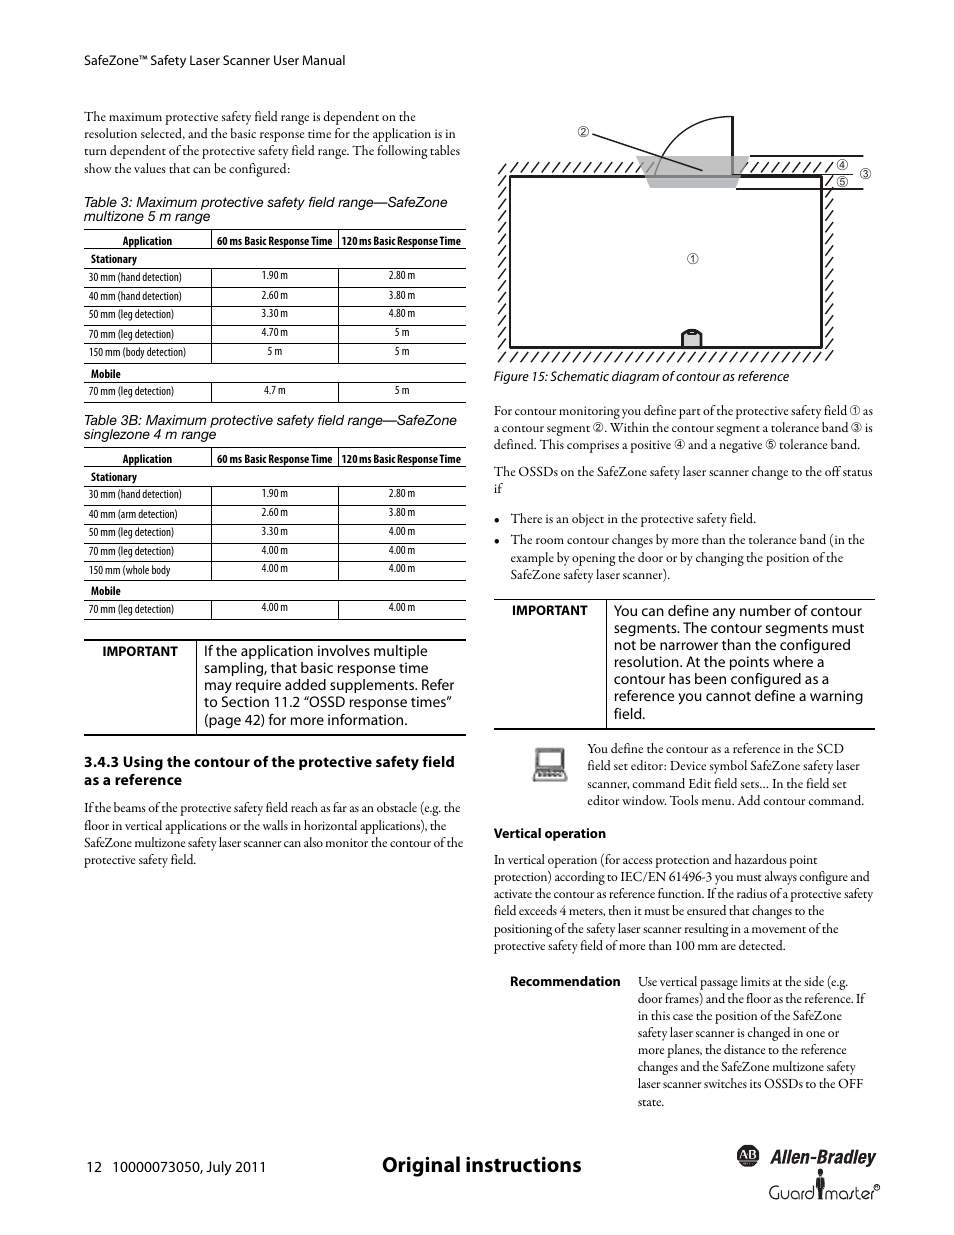 Original instructions | Rockwell Automation 442L SafeZone Singlezone & Multizone Safety Laser Scanner User Manual | Page 14 / 60